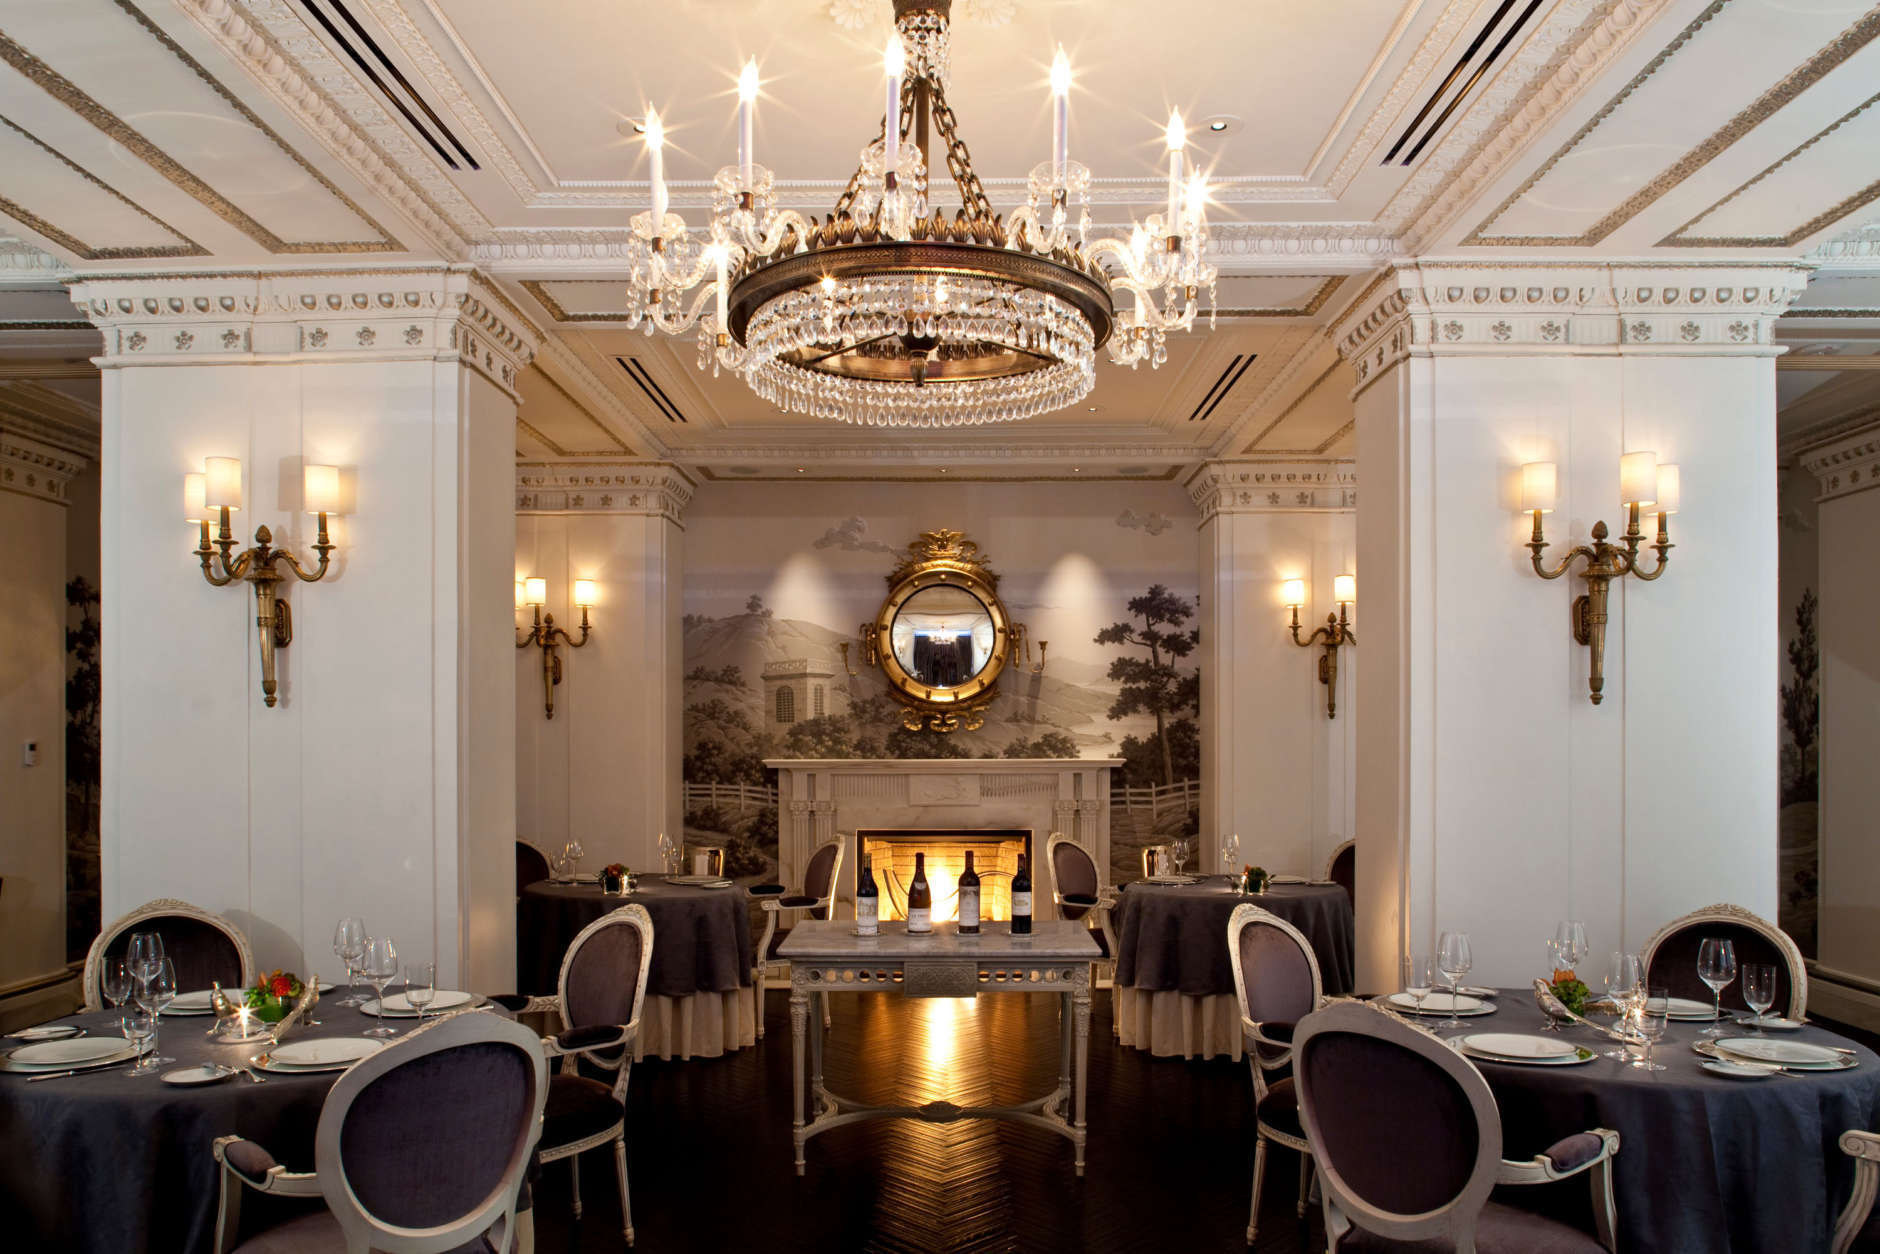 Plume is one of D.C.'s 12 Michelin-starred restaurants. Located in the Jefferson Hotel on 16th Street NW, the restaurant's focus is on fine dining. (Courtesy Kyle Schmitz)